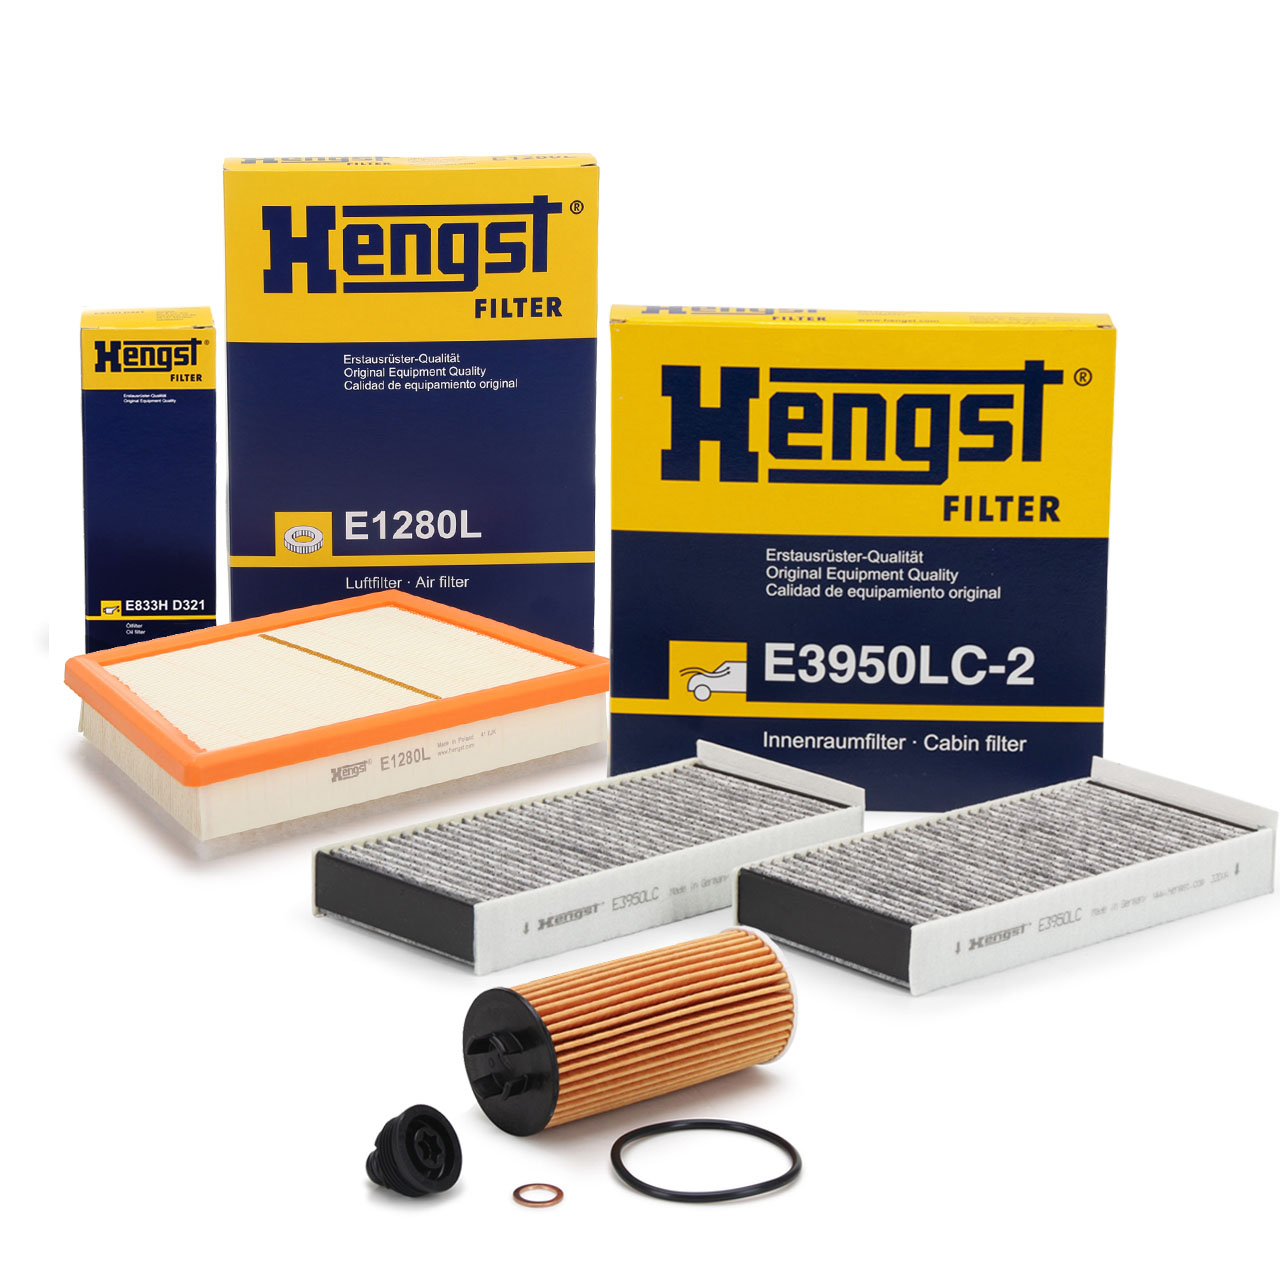 Hengst-Filtration range extract 